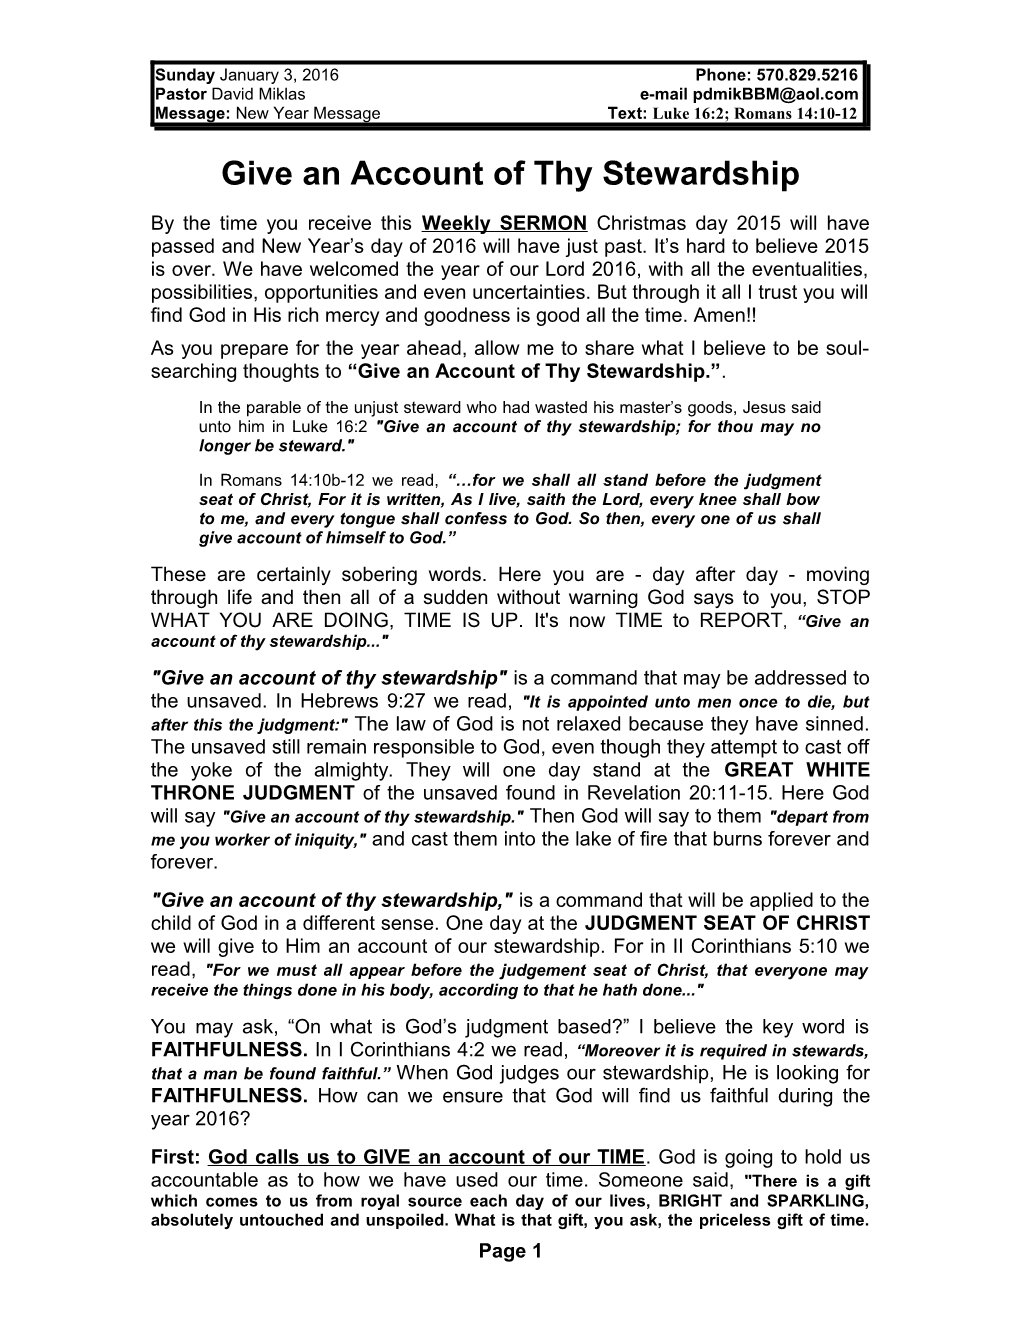 Give an Account of Thy Stewardship